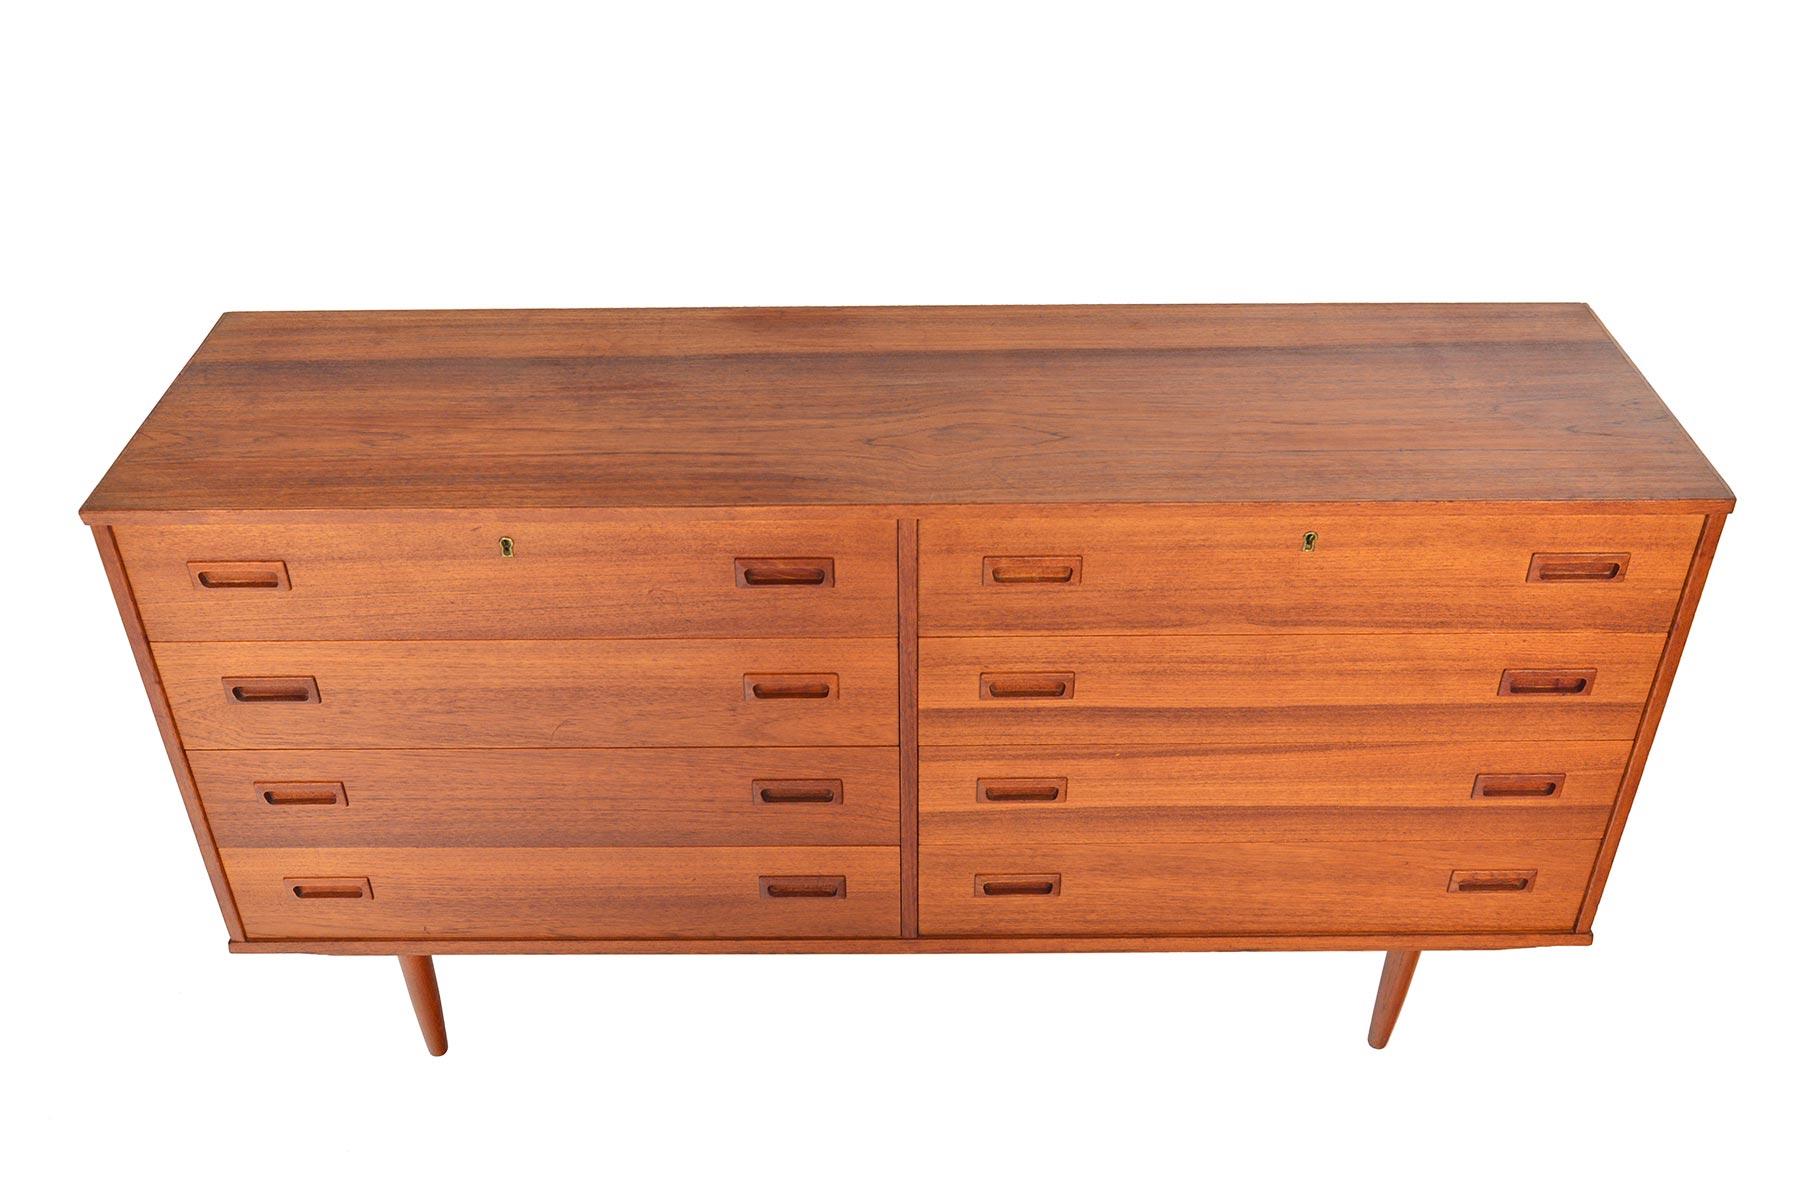 This Danish modern teak dresser offers the rare layout of a low, double dresser. Two bays with four drawers sit side by side in this wide yet narrow piece. In original condition.

 